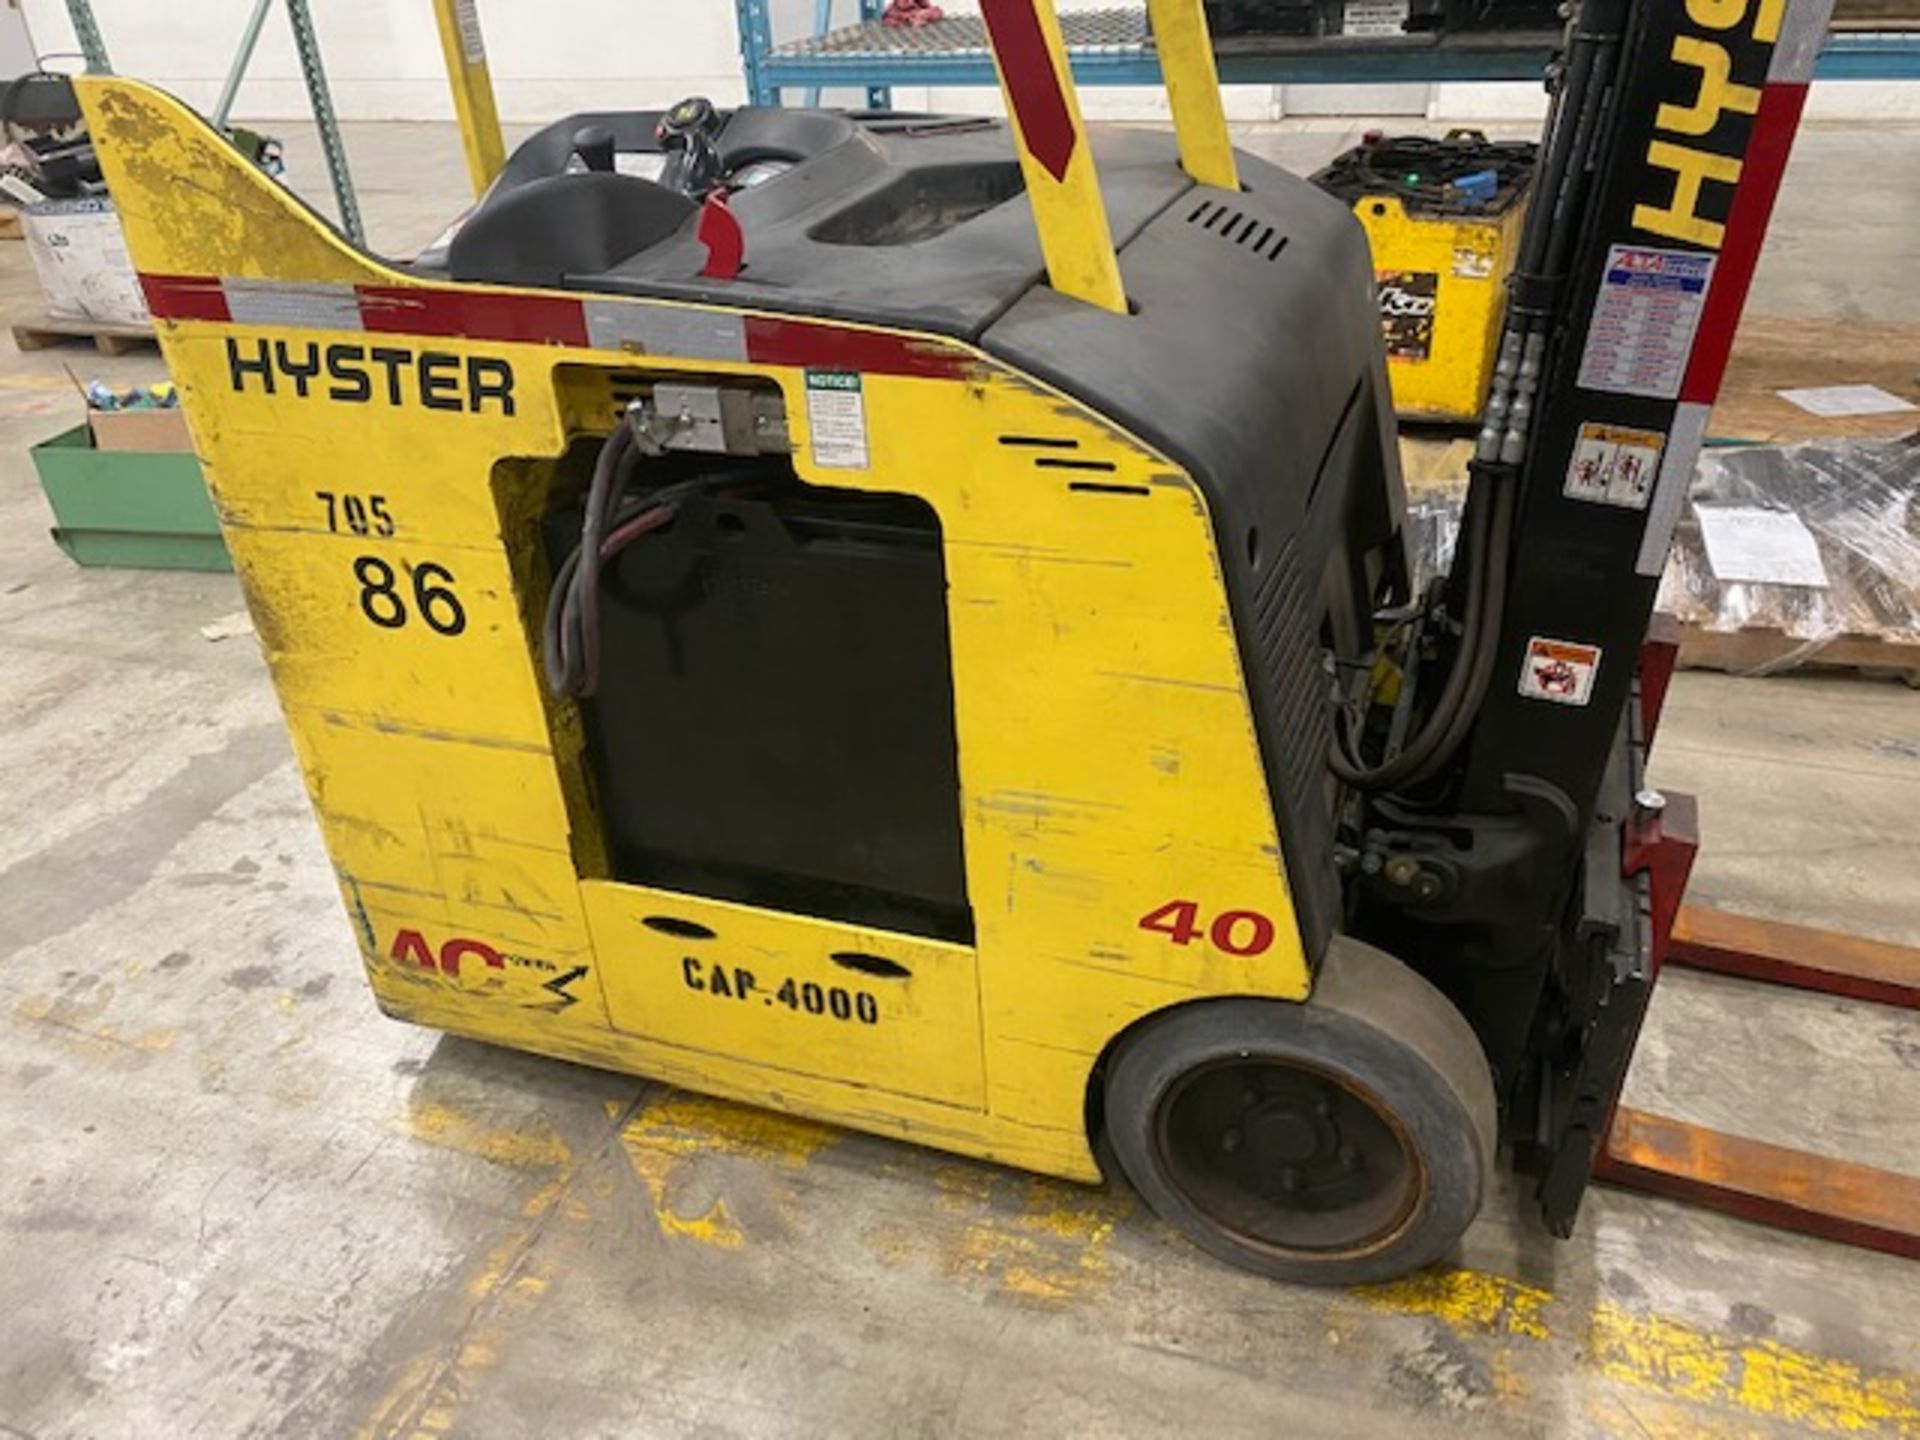 2014 Hyster 4,000 Lb Capacity Electric Forklift Model E40HSD2-21 - Image 3 of 9